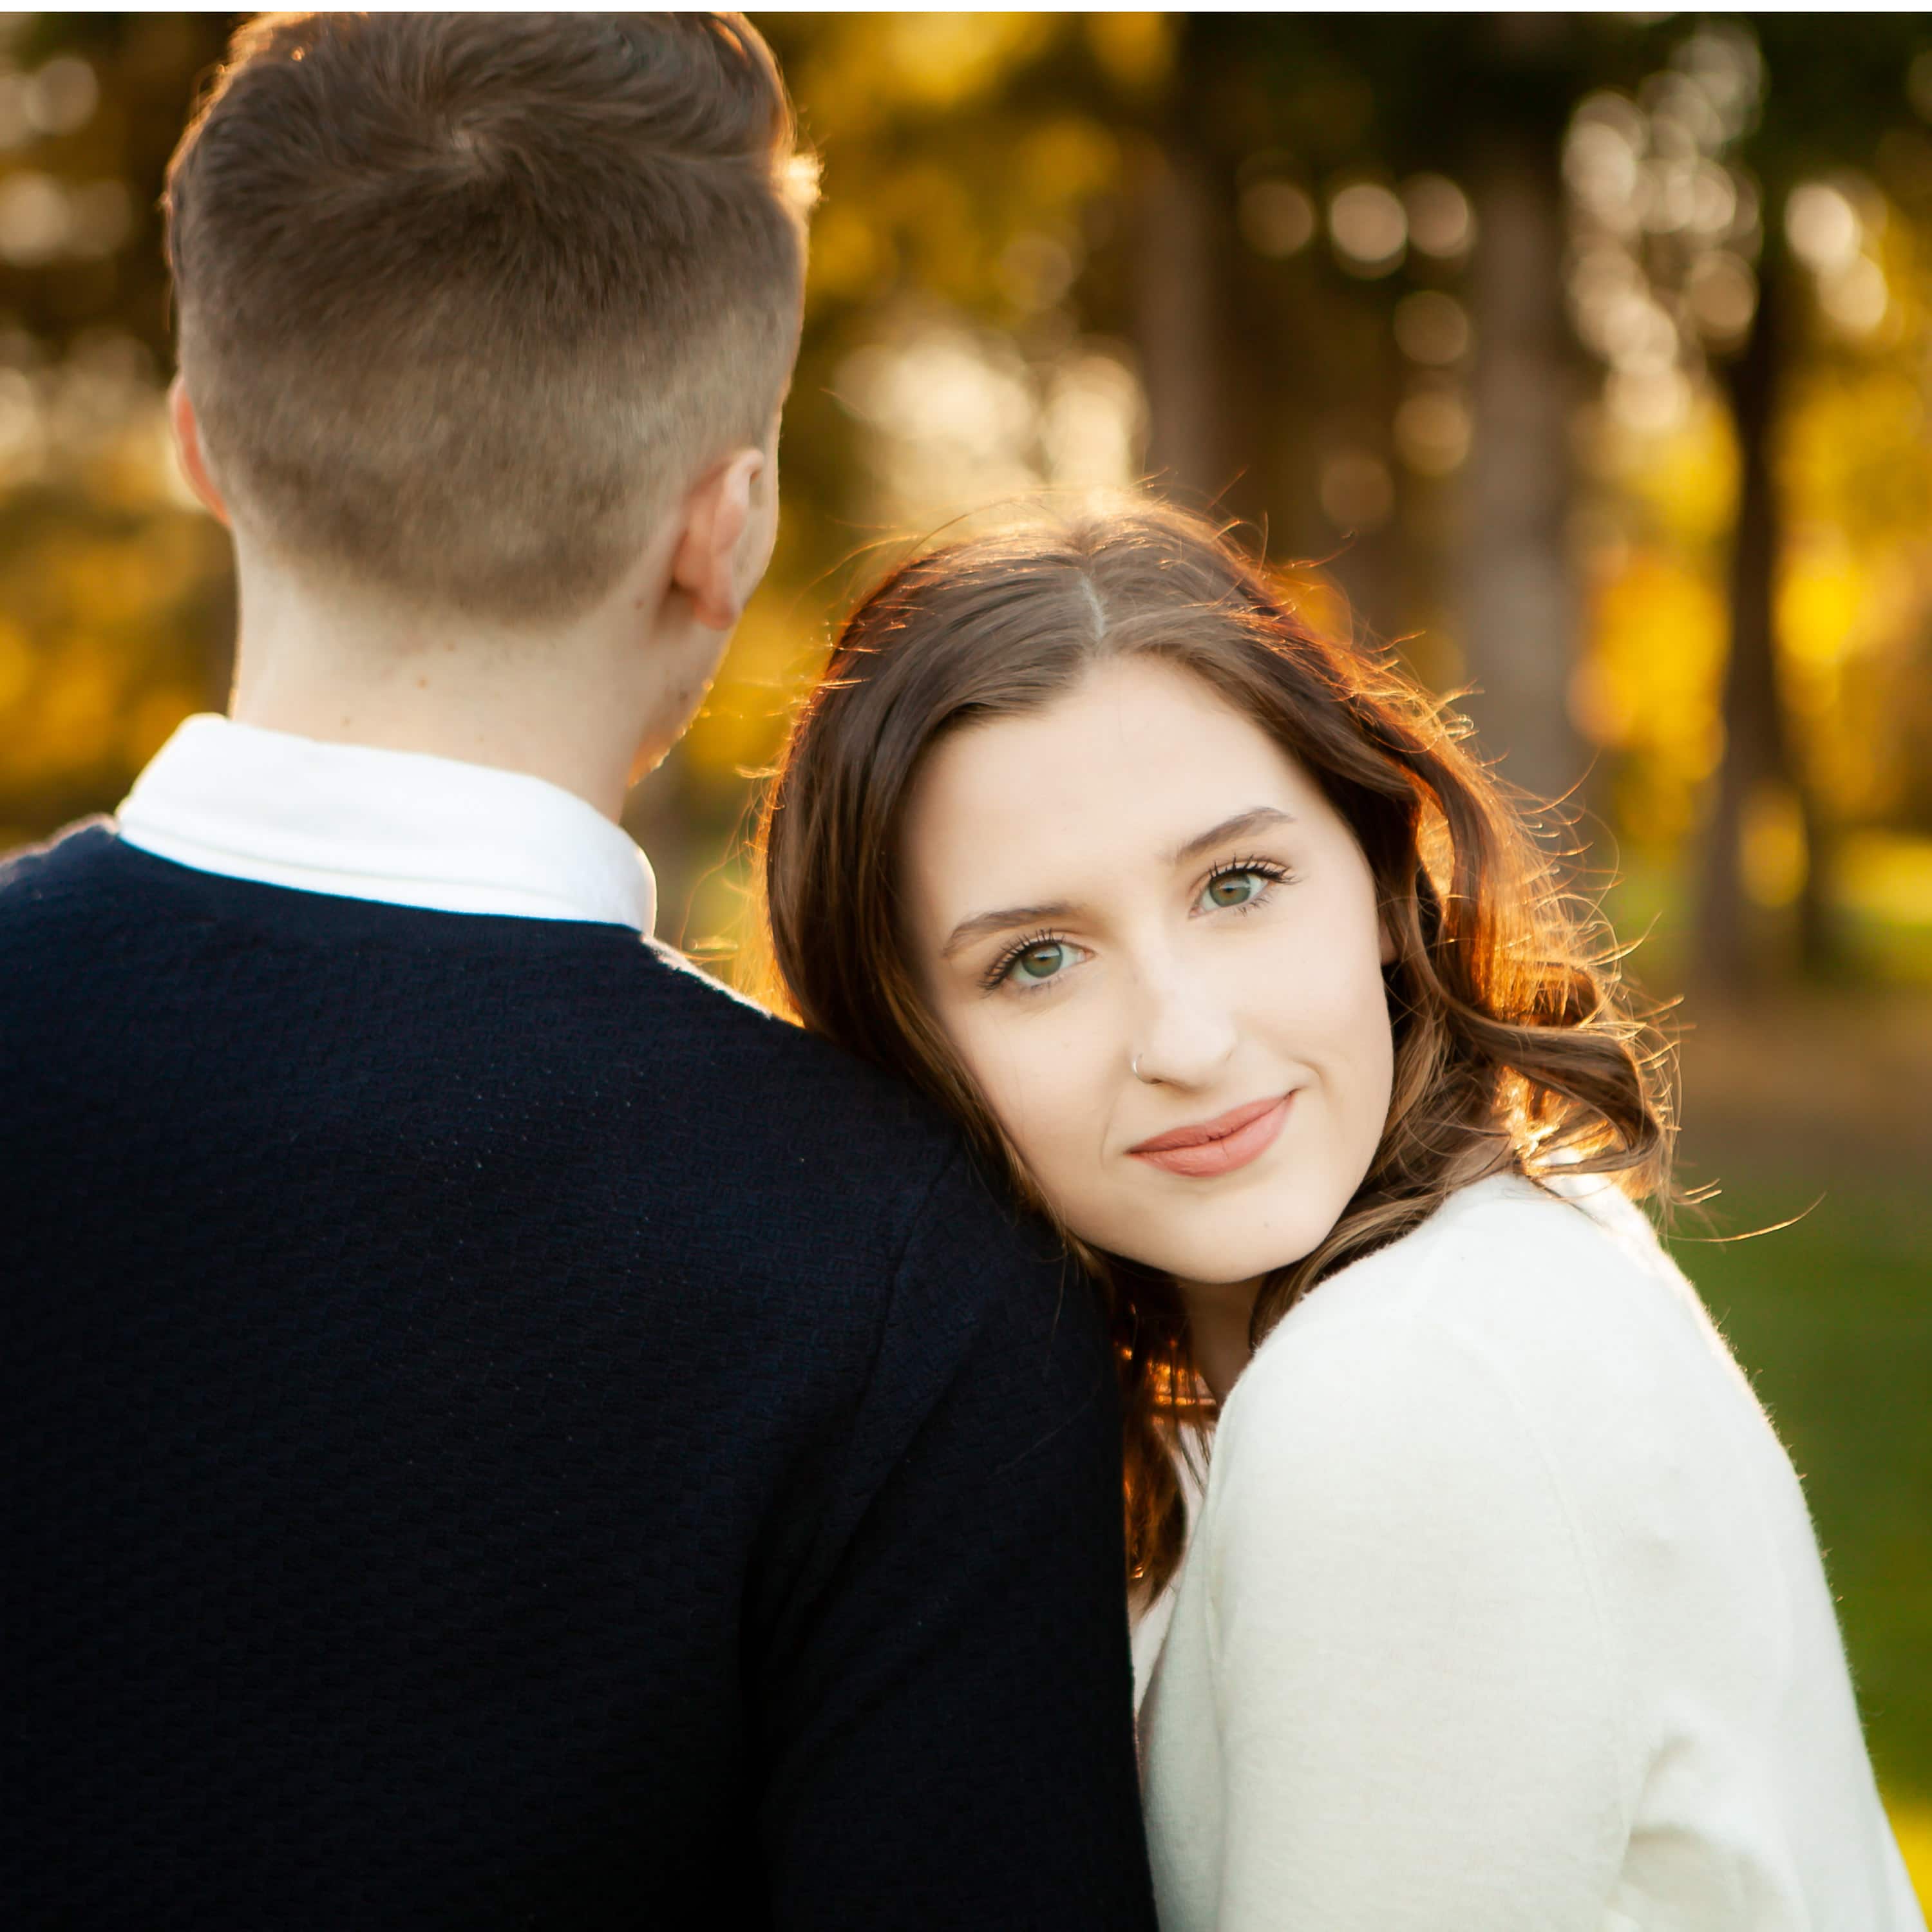 pnw adventure engagement session in bellingham wa fall photo inspiration Hovander close up